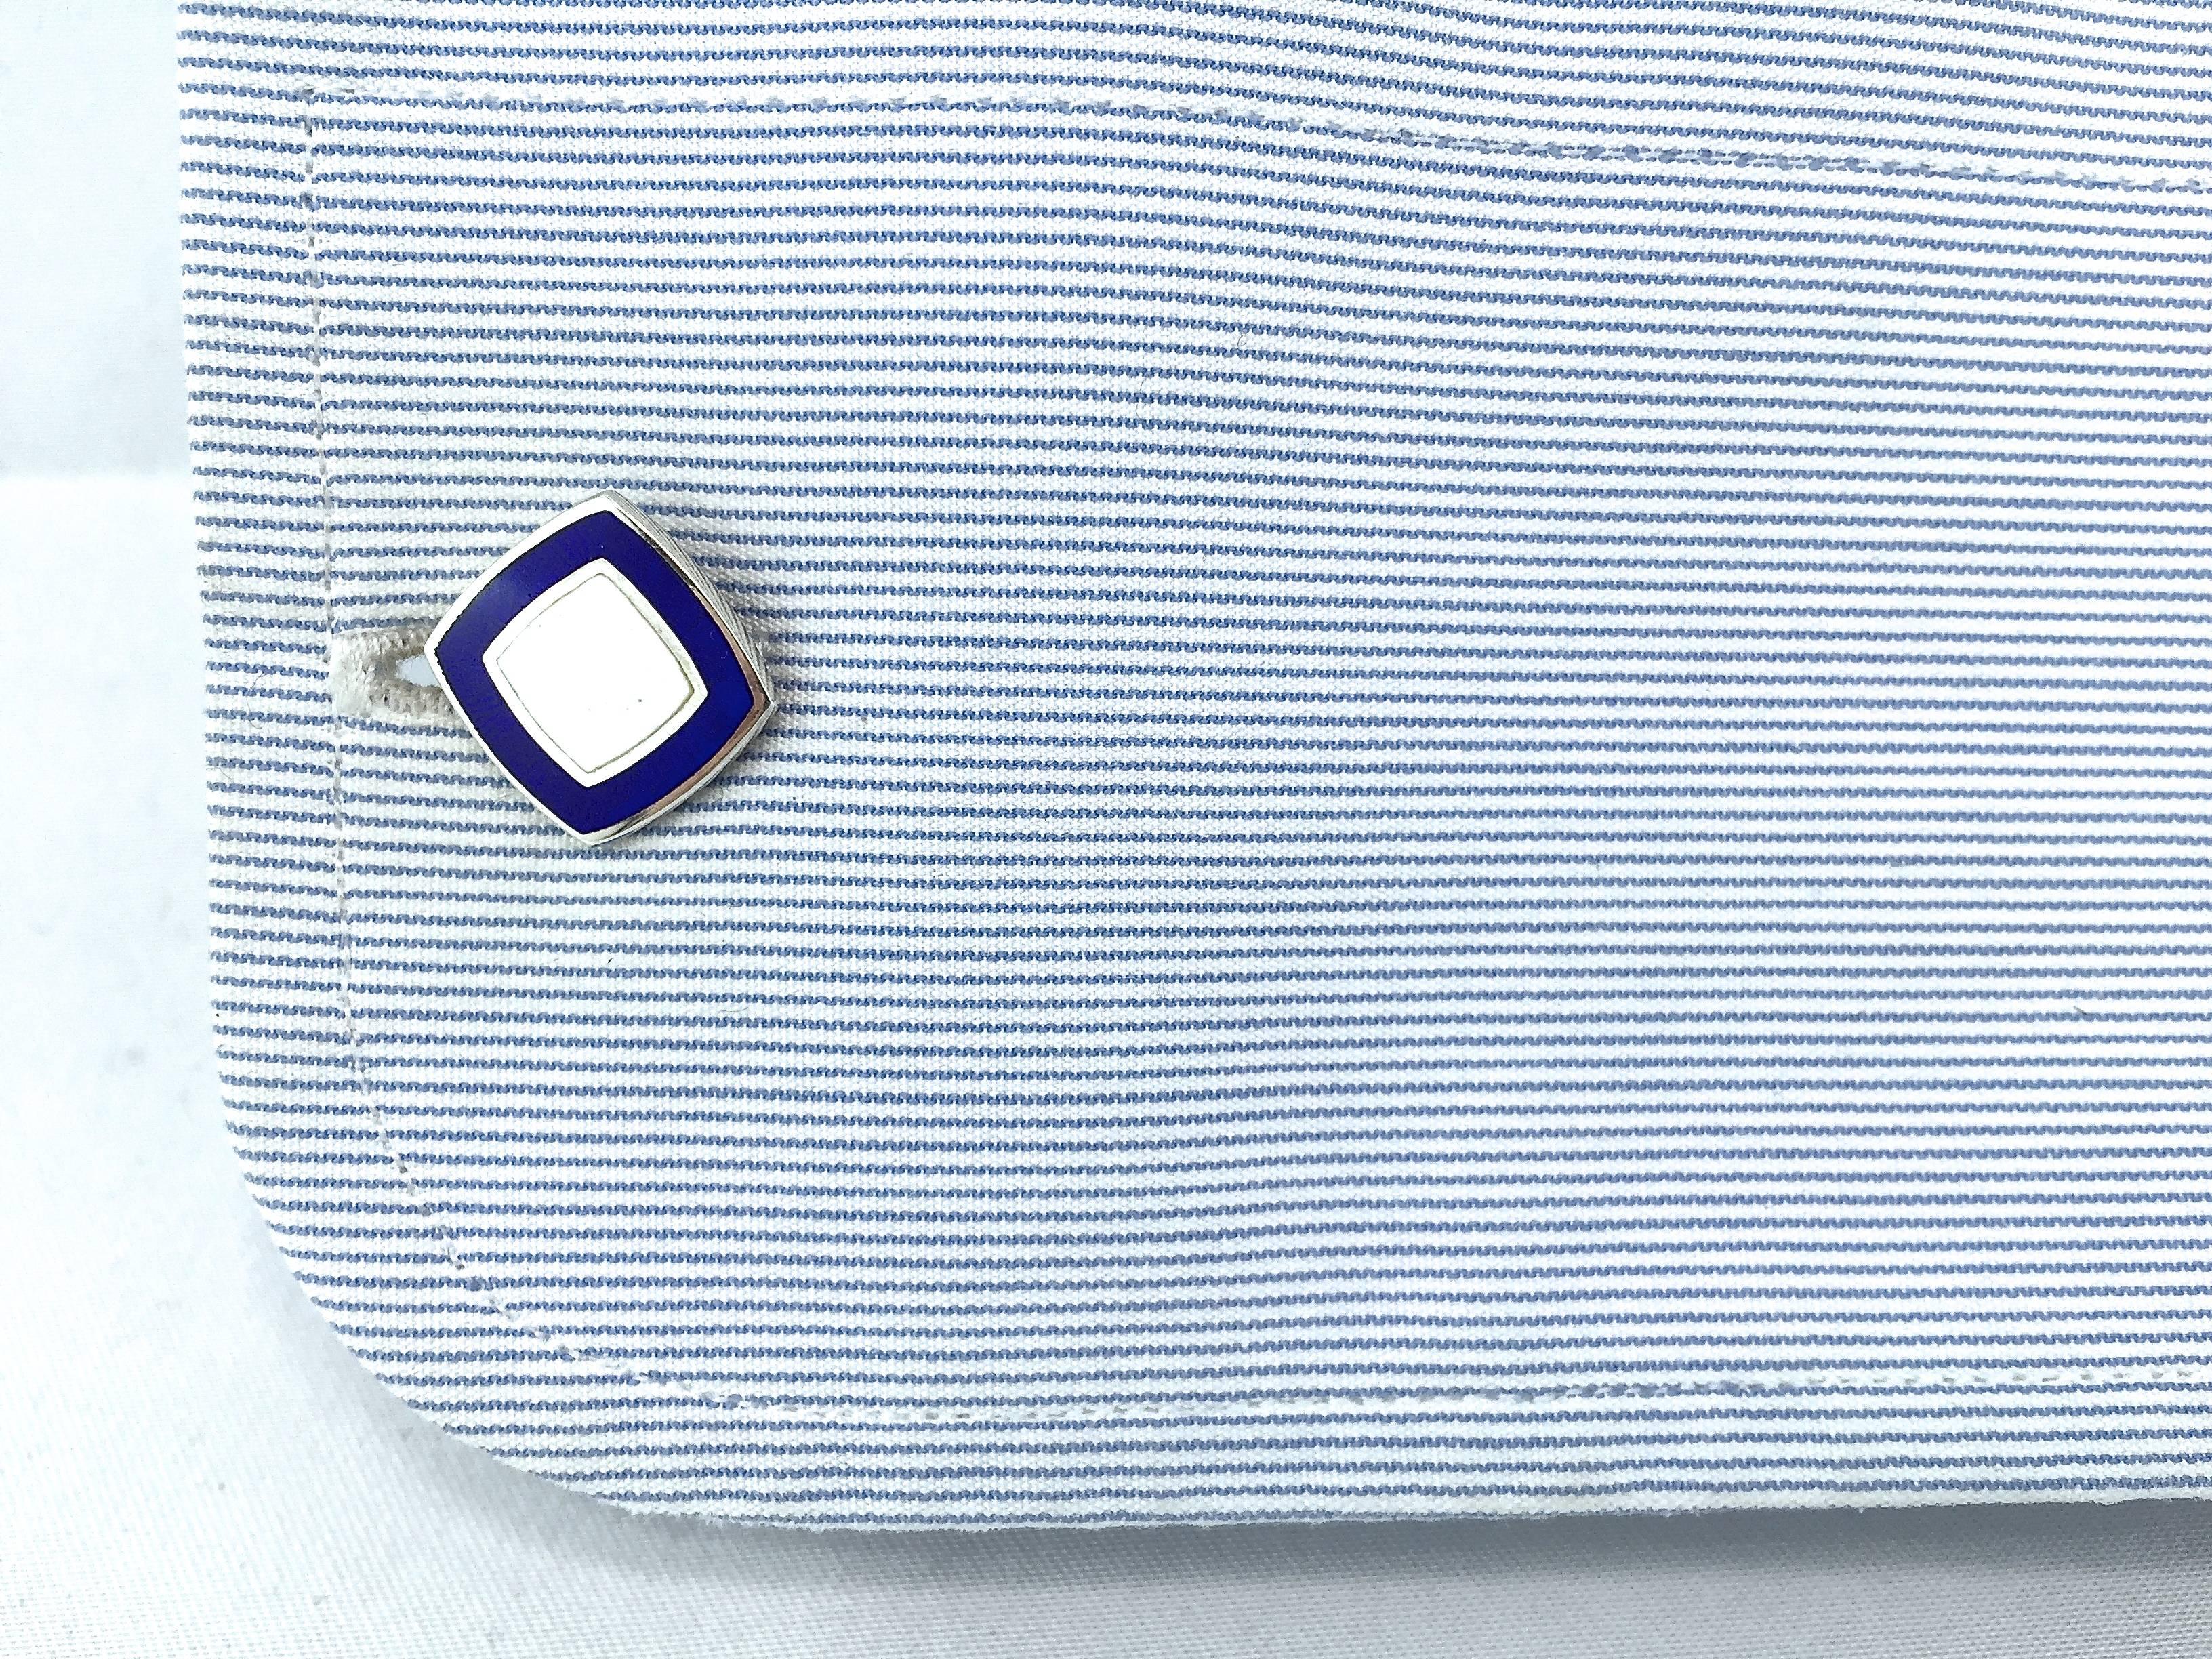 Jona sterling silver cuff links with blue and white enamel.
All Jona jewelry is new and has never been previously owned or worn. Each item will arrive at your door beautifully gift wrapped in Jona boxes, put inside an elegant pouch or jewel box.
